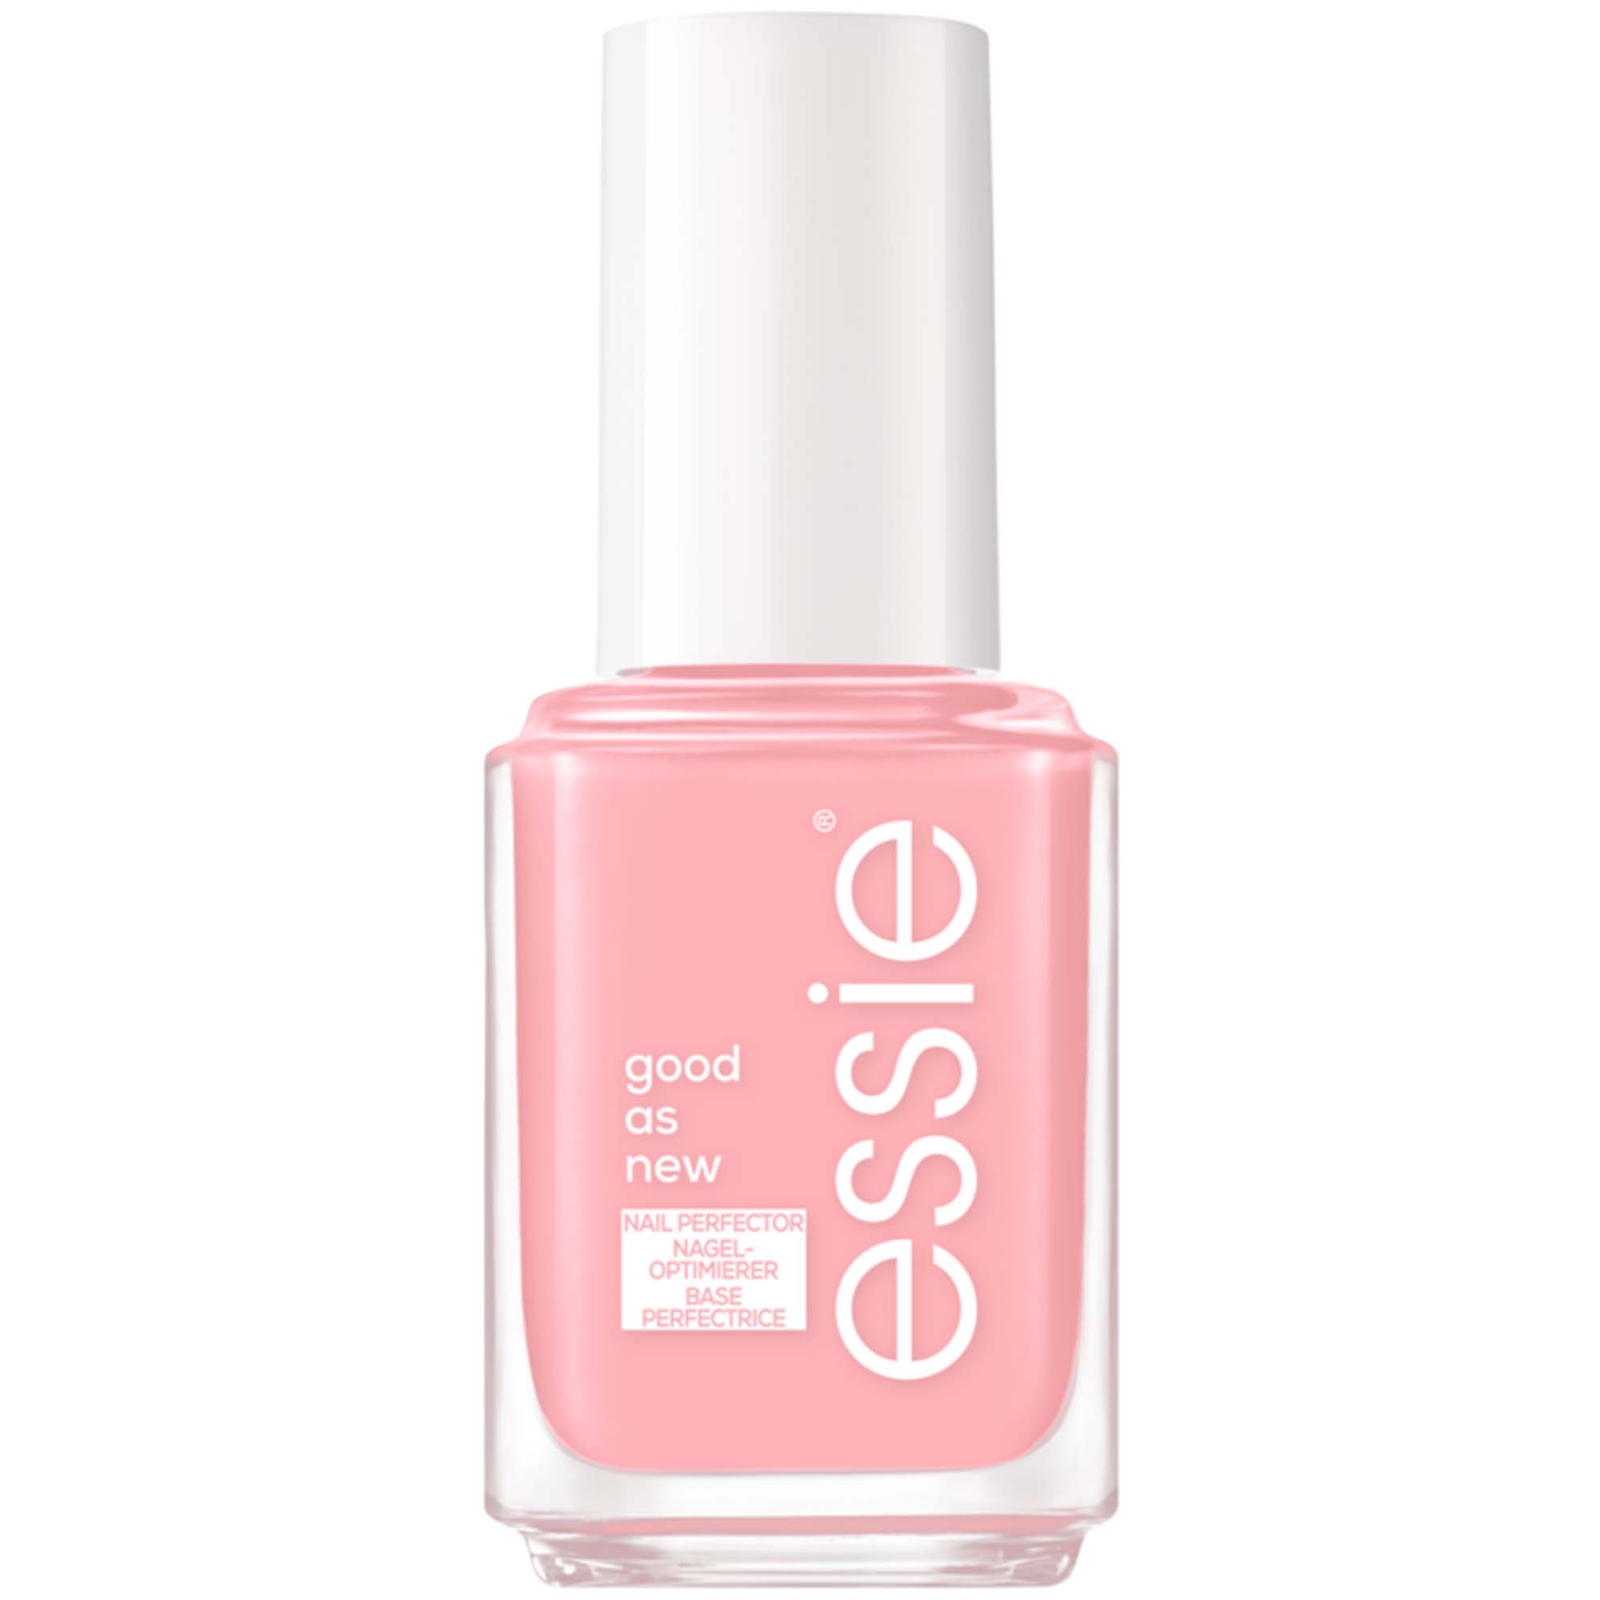 Image of essie Nail Care Treatment Good As New Nail Perfector Nail Concealer Corrector - Light Pink